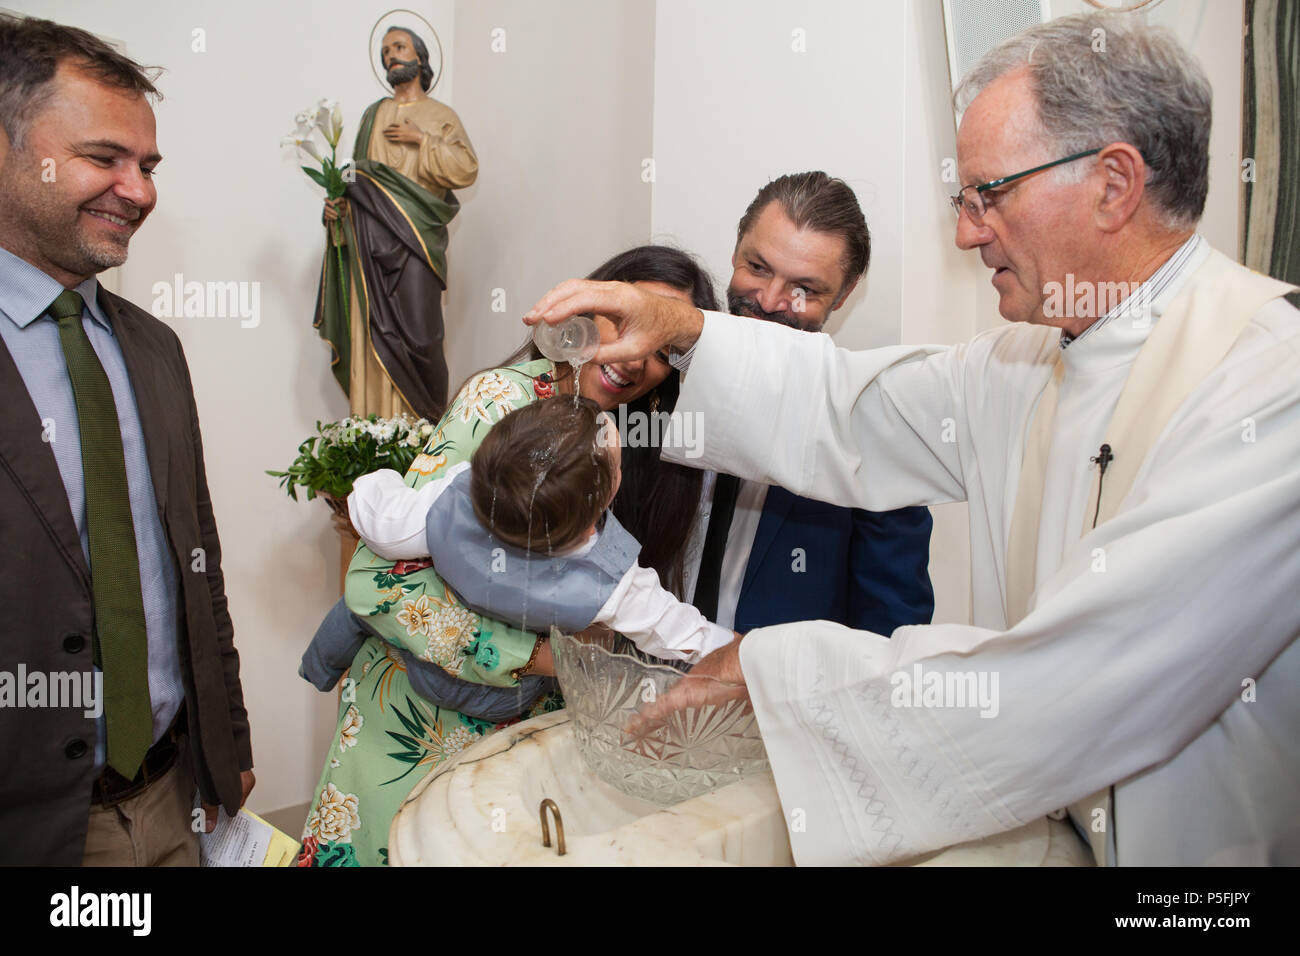 A baby boy is baptised by a priest in a Catholic Church Stock Photo